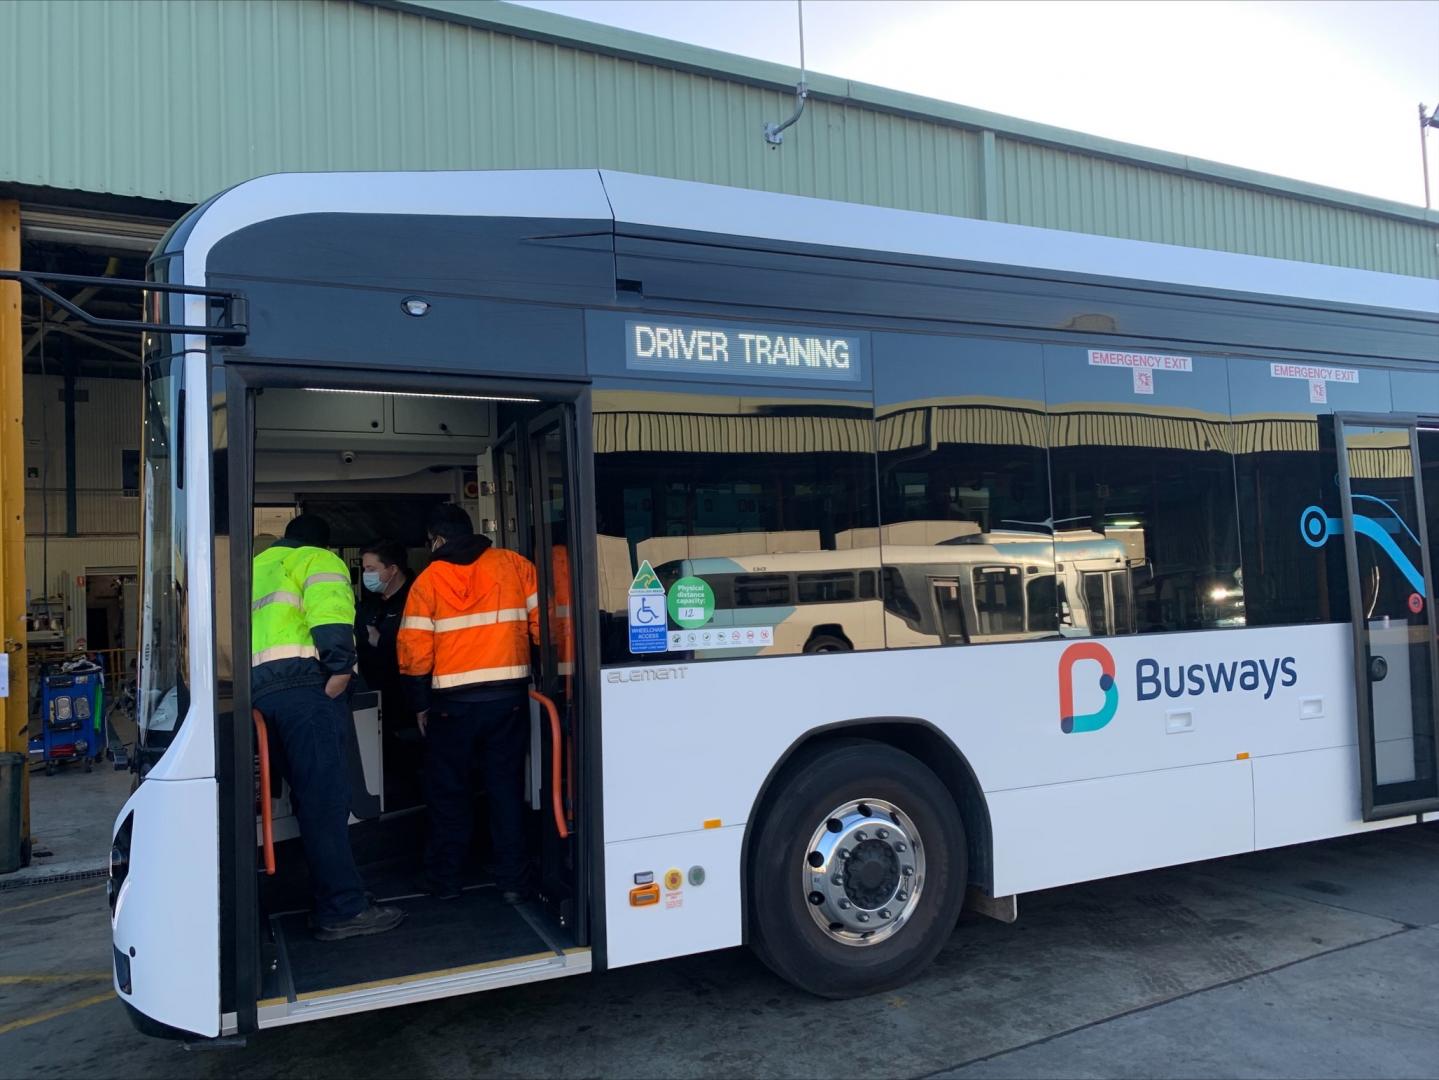 Drivers training on electric bus